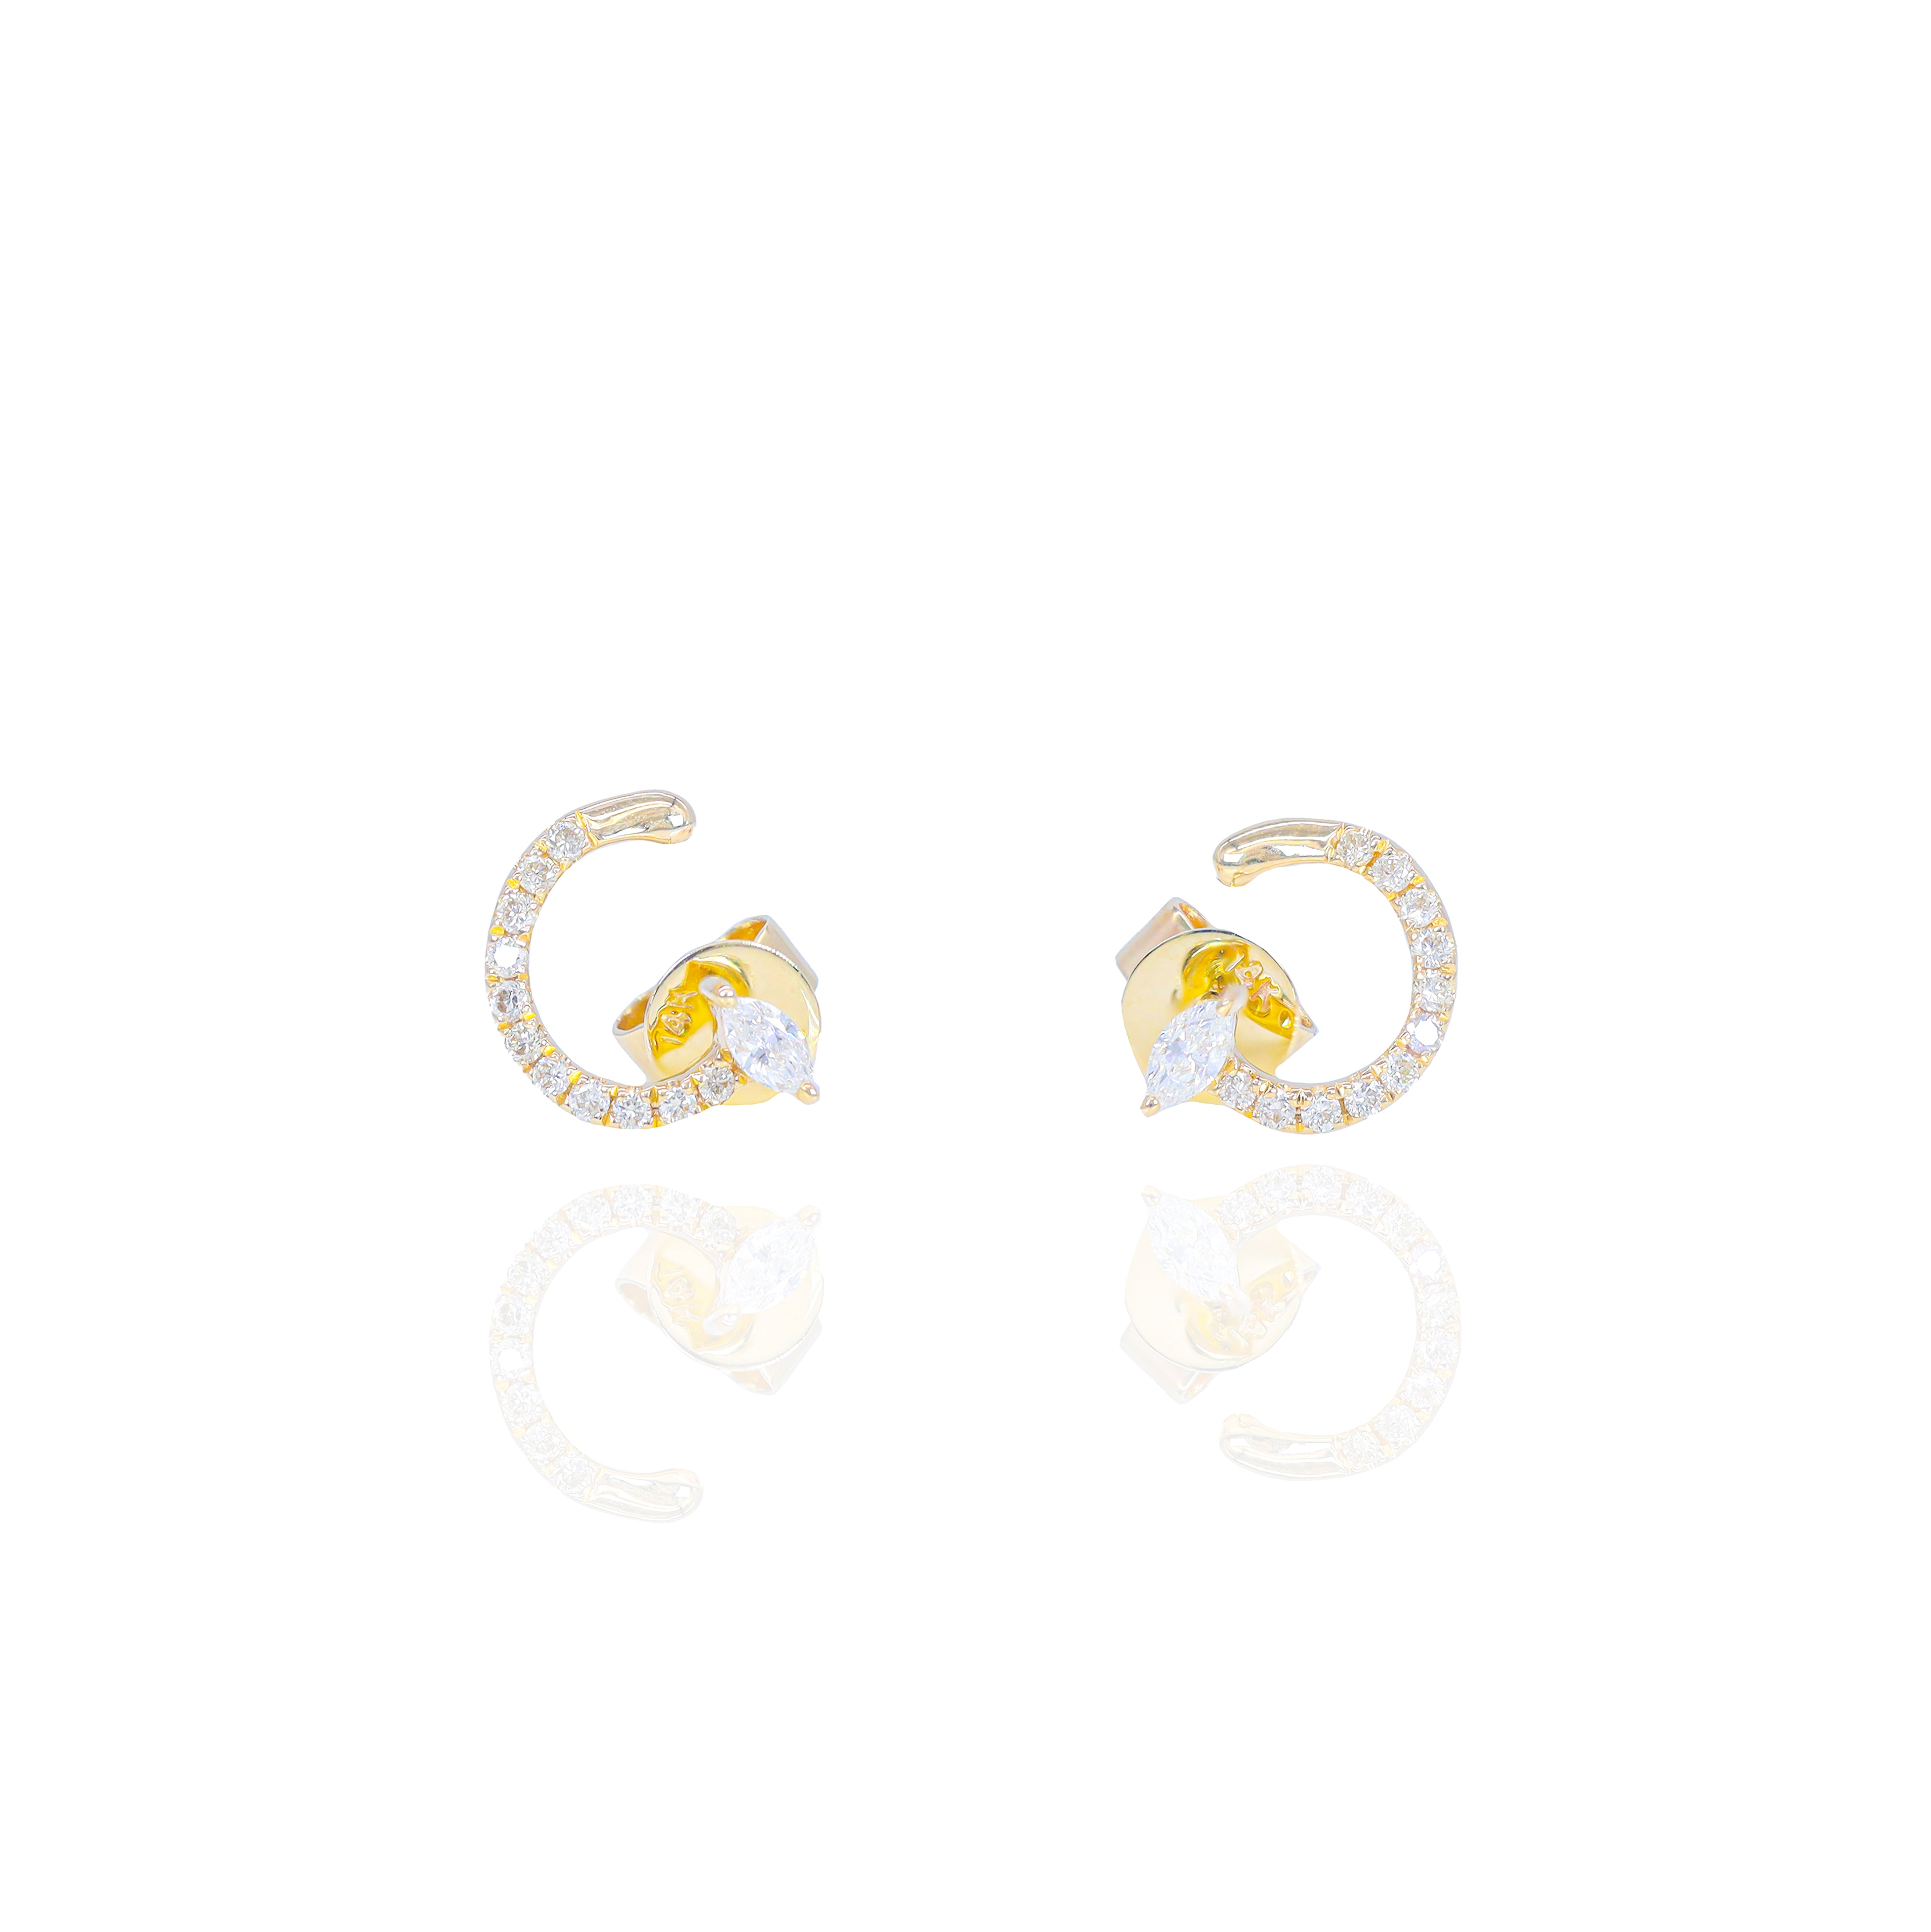 Half Circle Marquis and Round Diamond Earrings